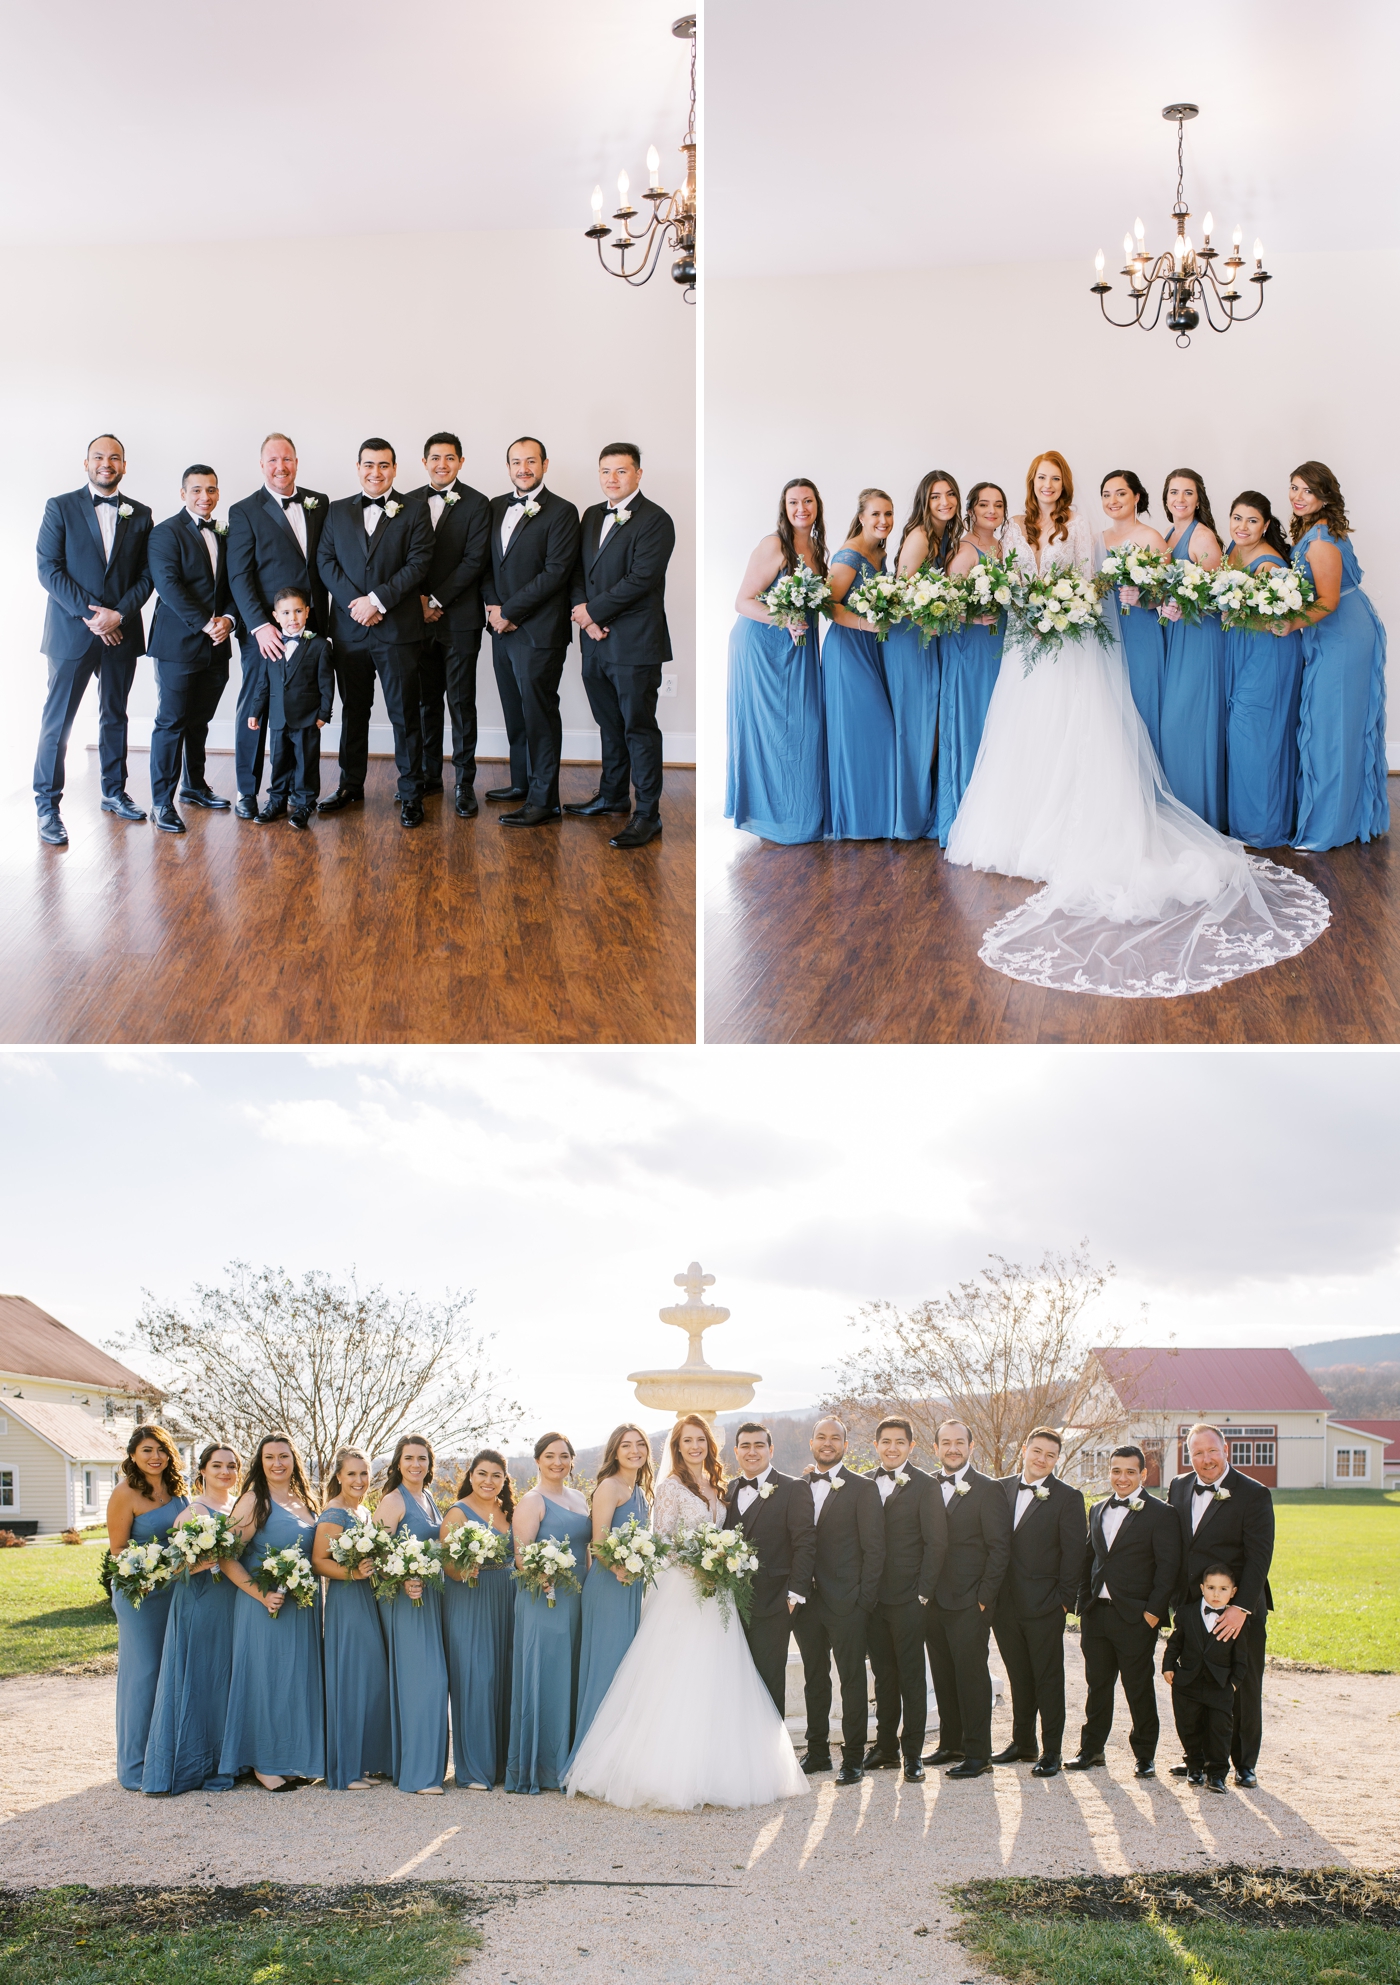 Bridesmaids in dusty blue gowns